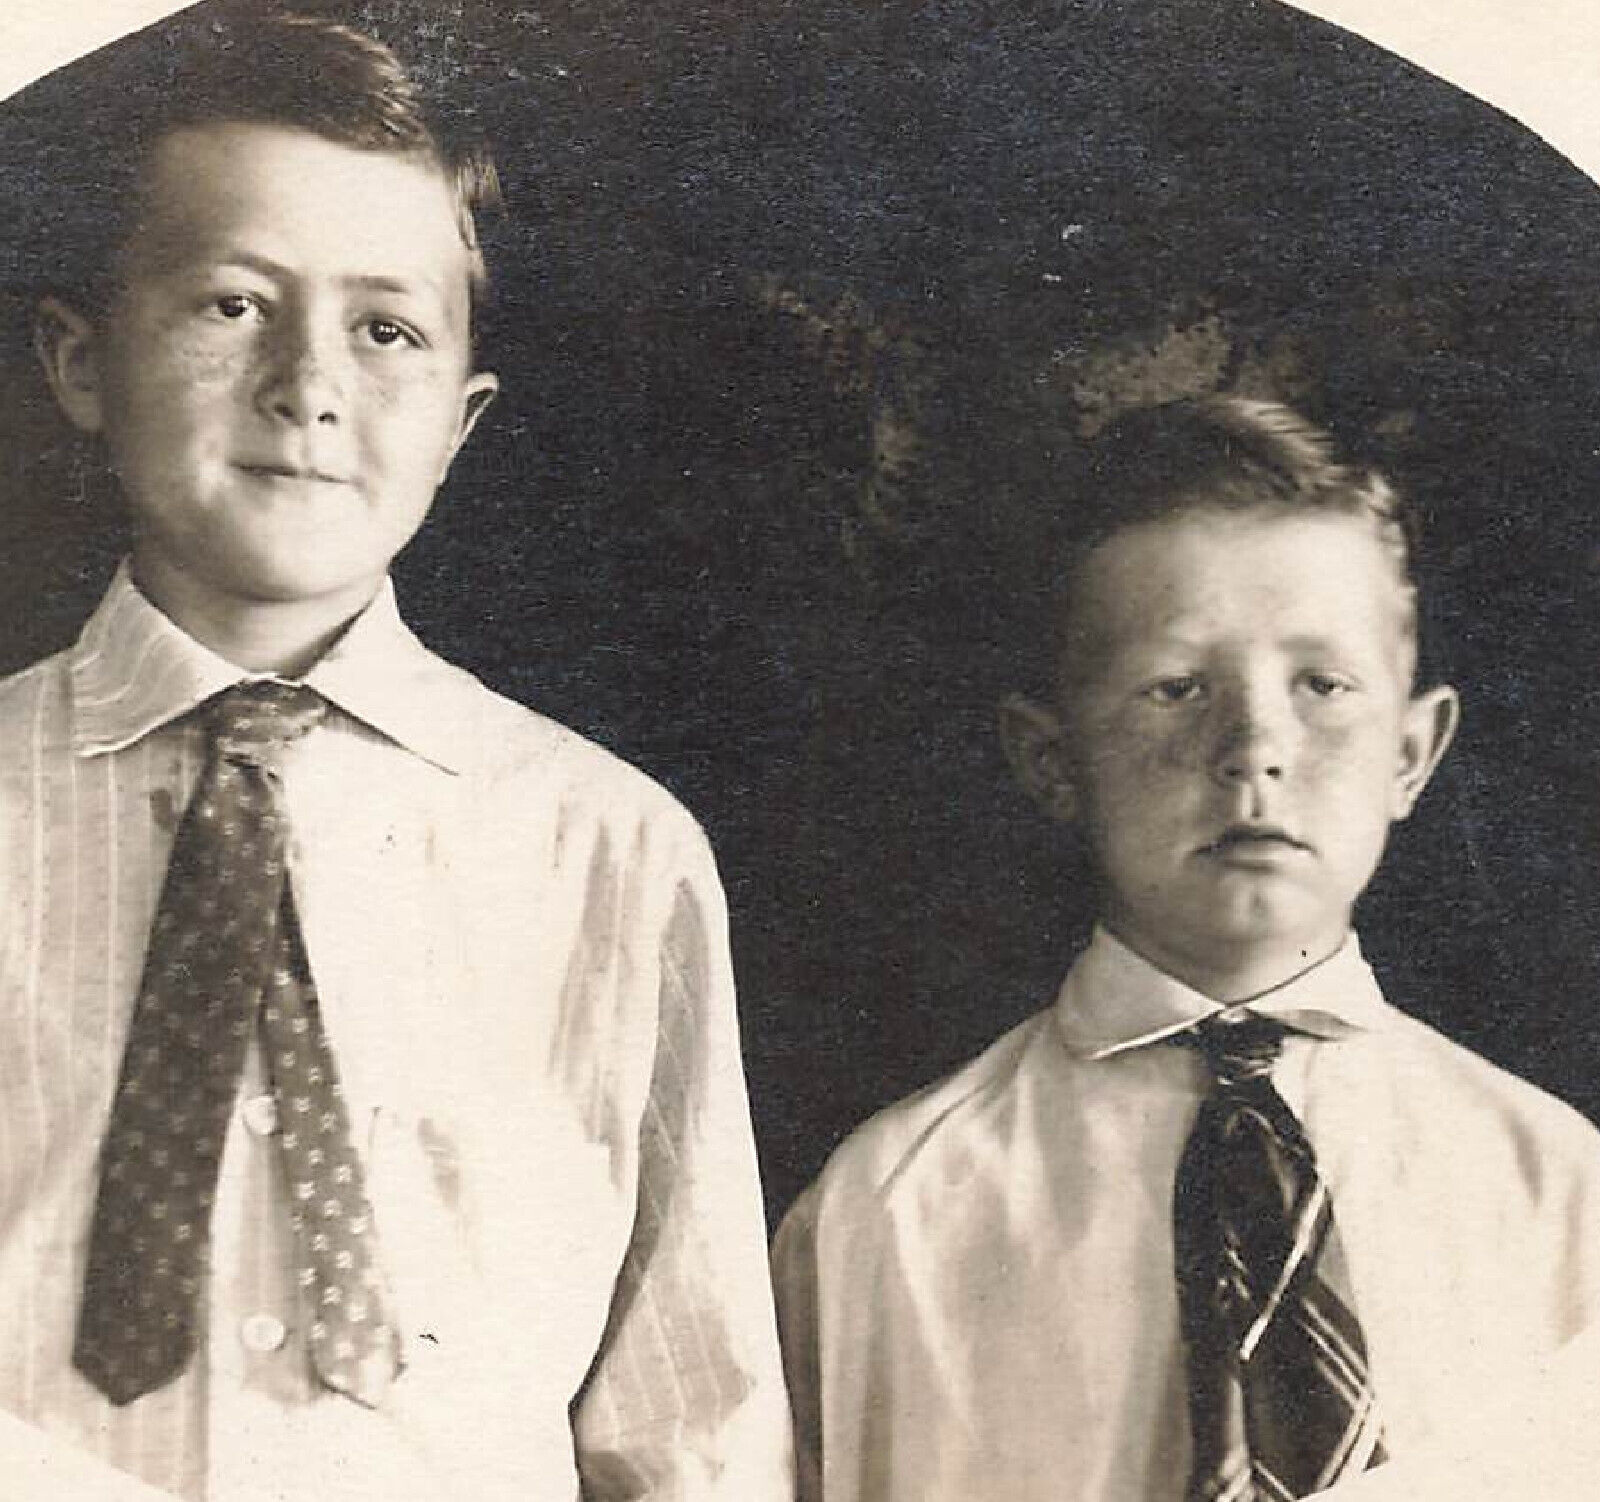 VINTAGE RPPC REAL PHOTO POSTCARD TWO YOUNG BOYS IN NECKTIES 082423 S